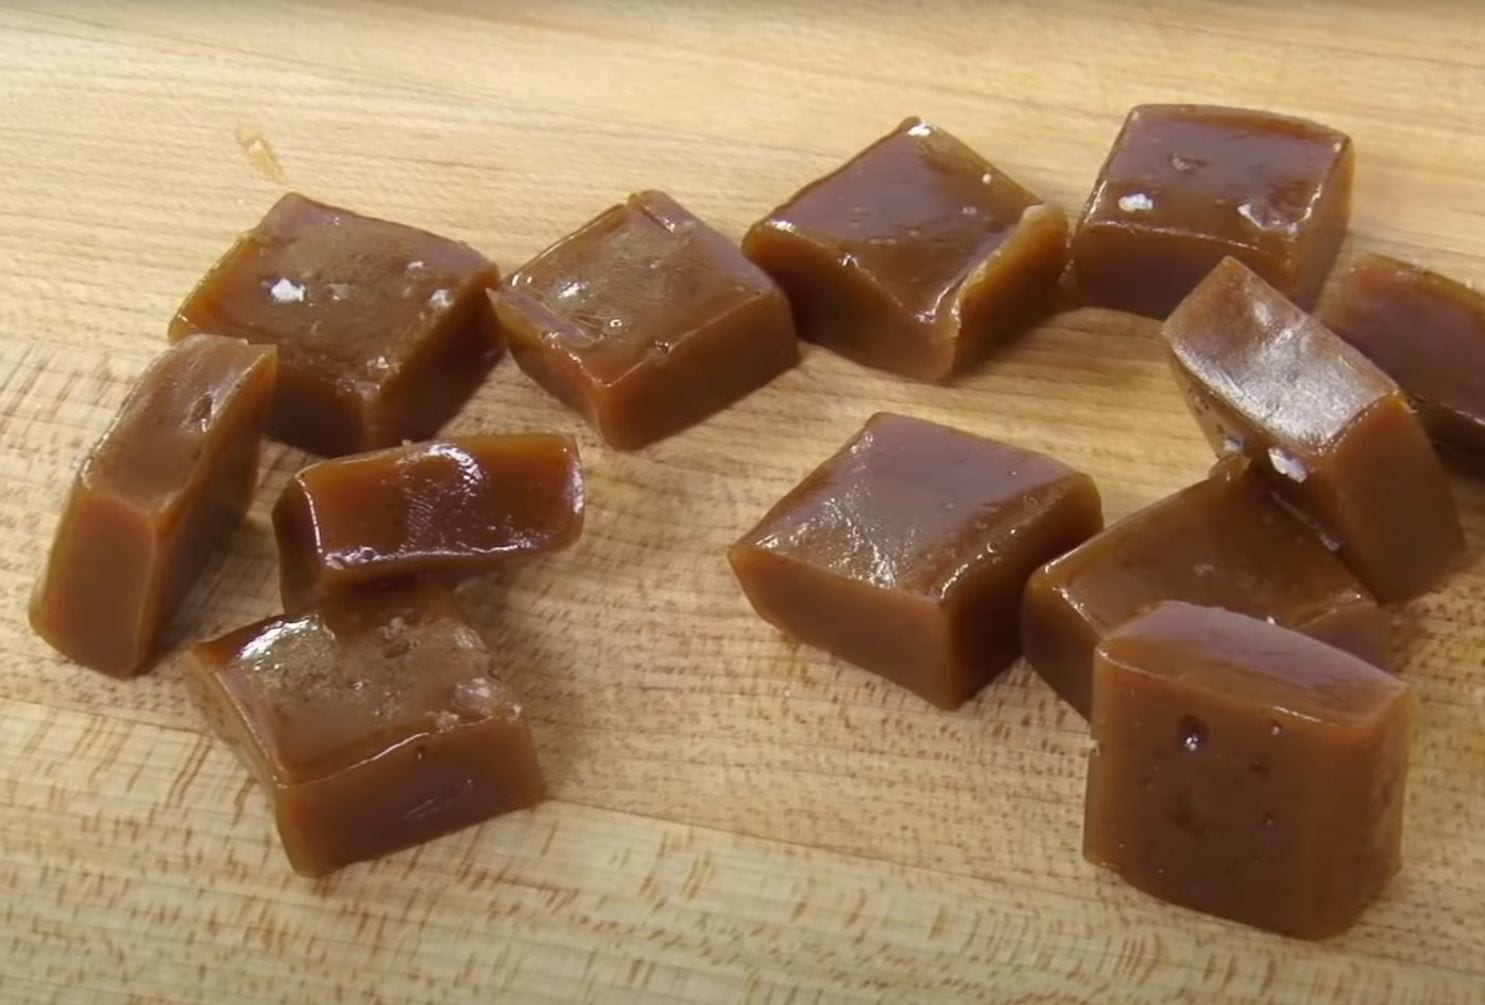 12 dark brown soft caramel squares with flecks of white salt occasionally visible; on a brown wooden counter top